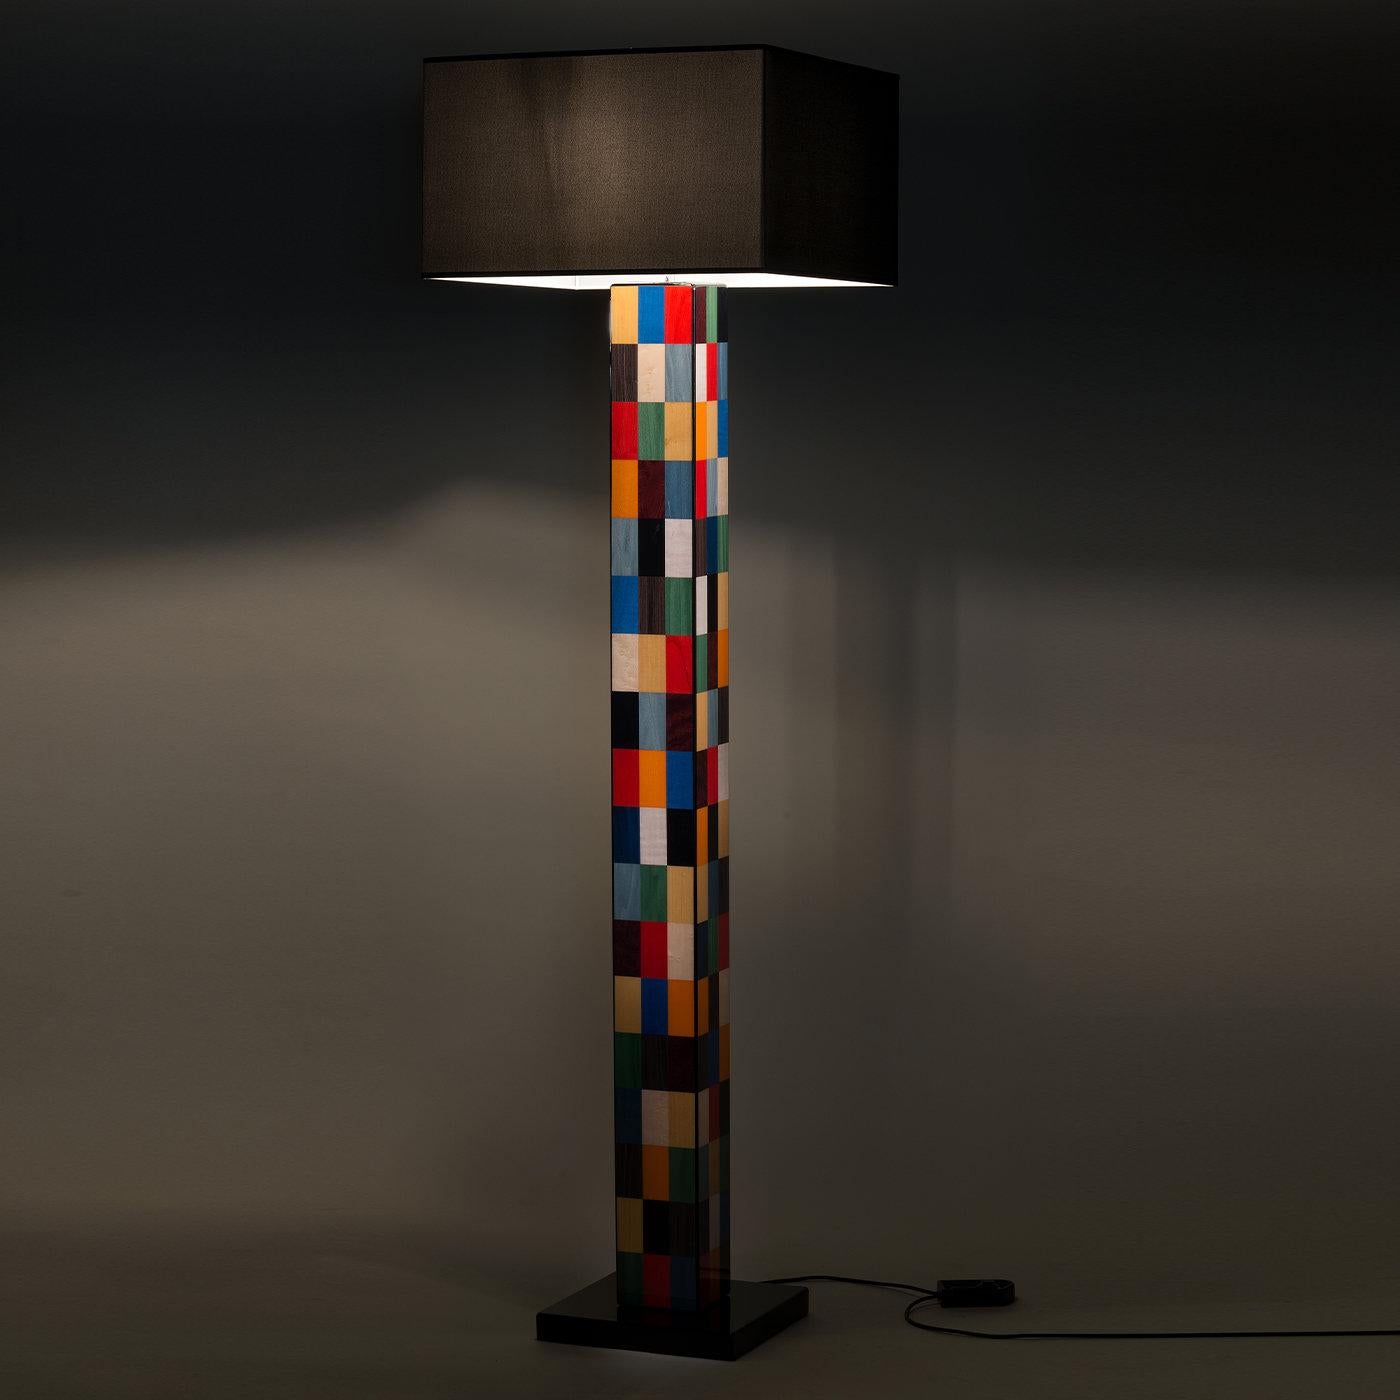 Distinguished by modern art-inspired motifs, this exquisite floor lamp will make a bold and stately addition to a contemporary or eclectic decor. Masterfully handcrafted of wood, it features a geometric stem rising from a square black-lacquered